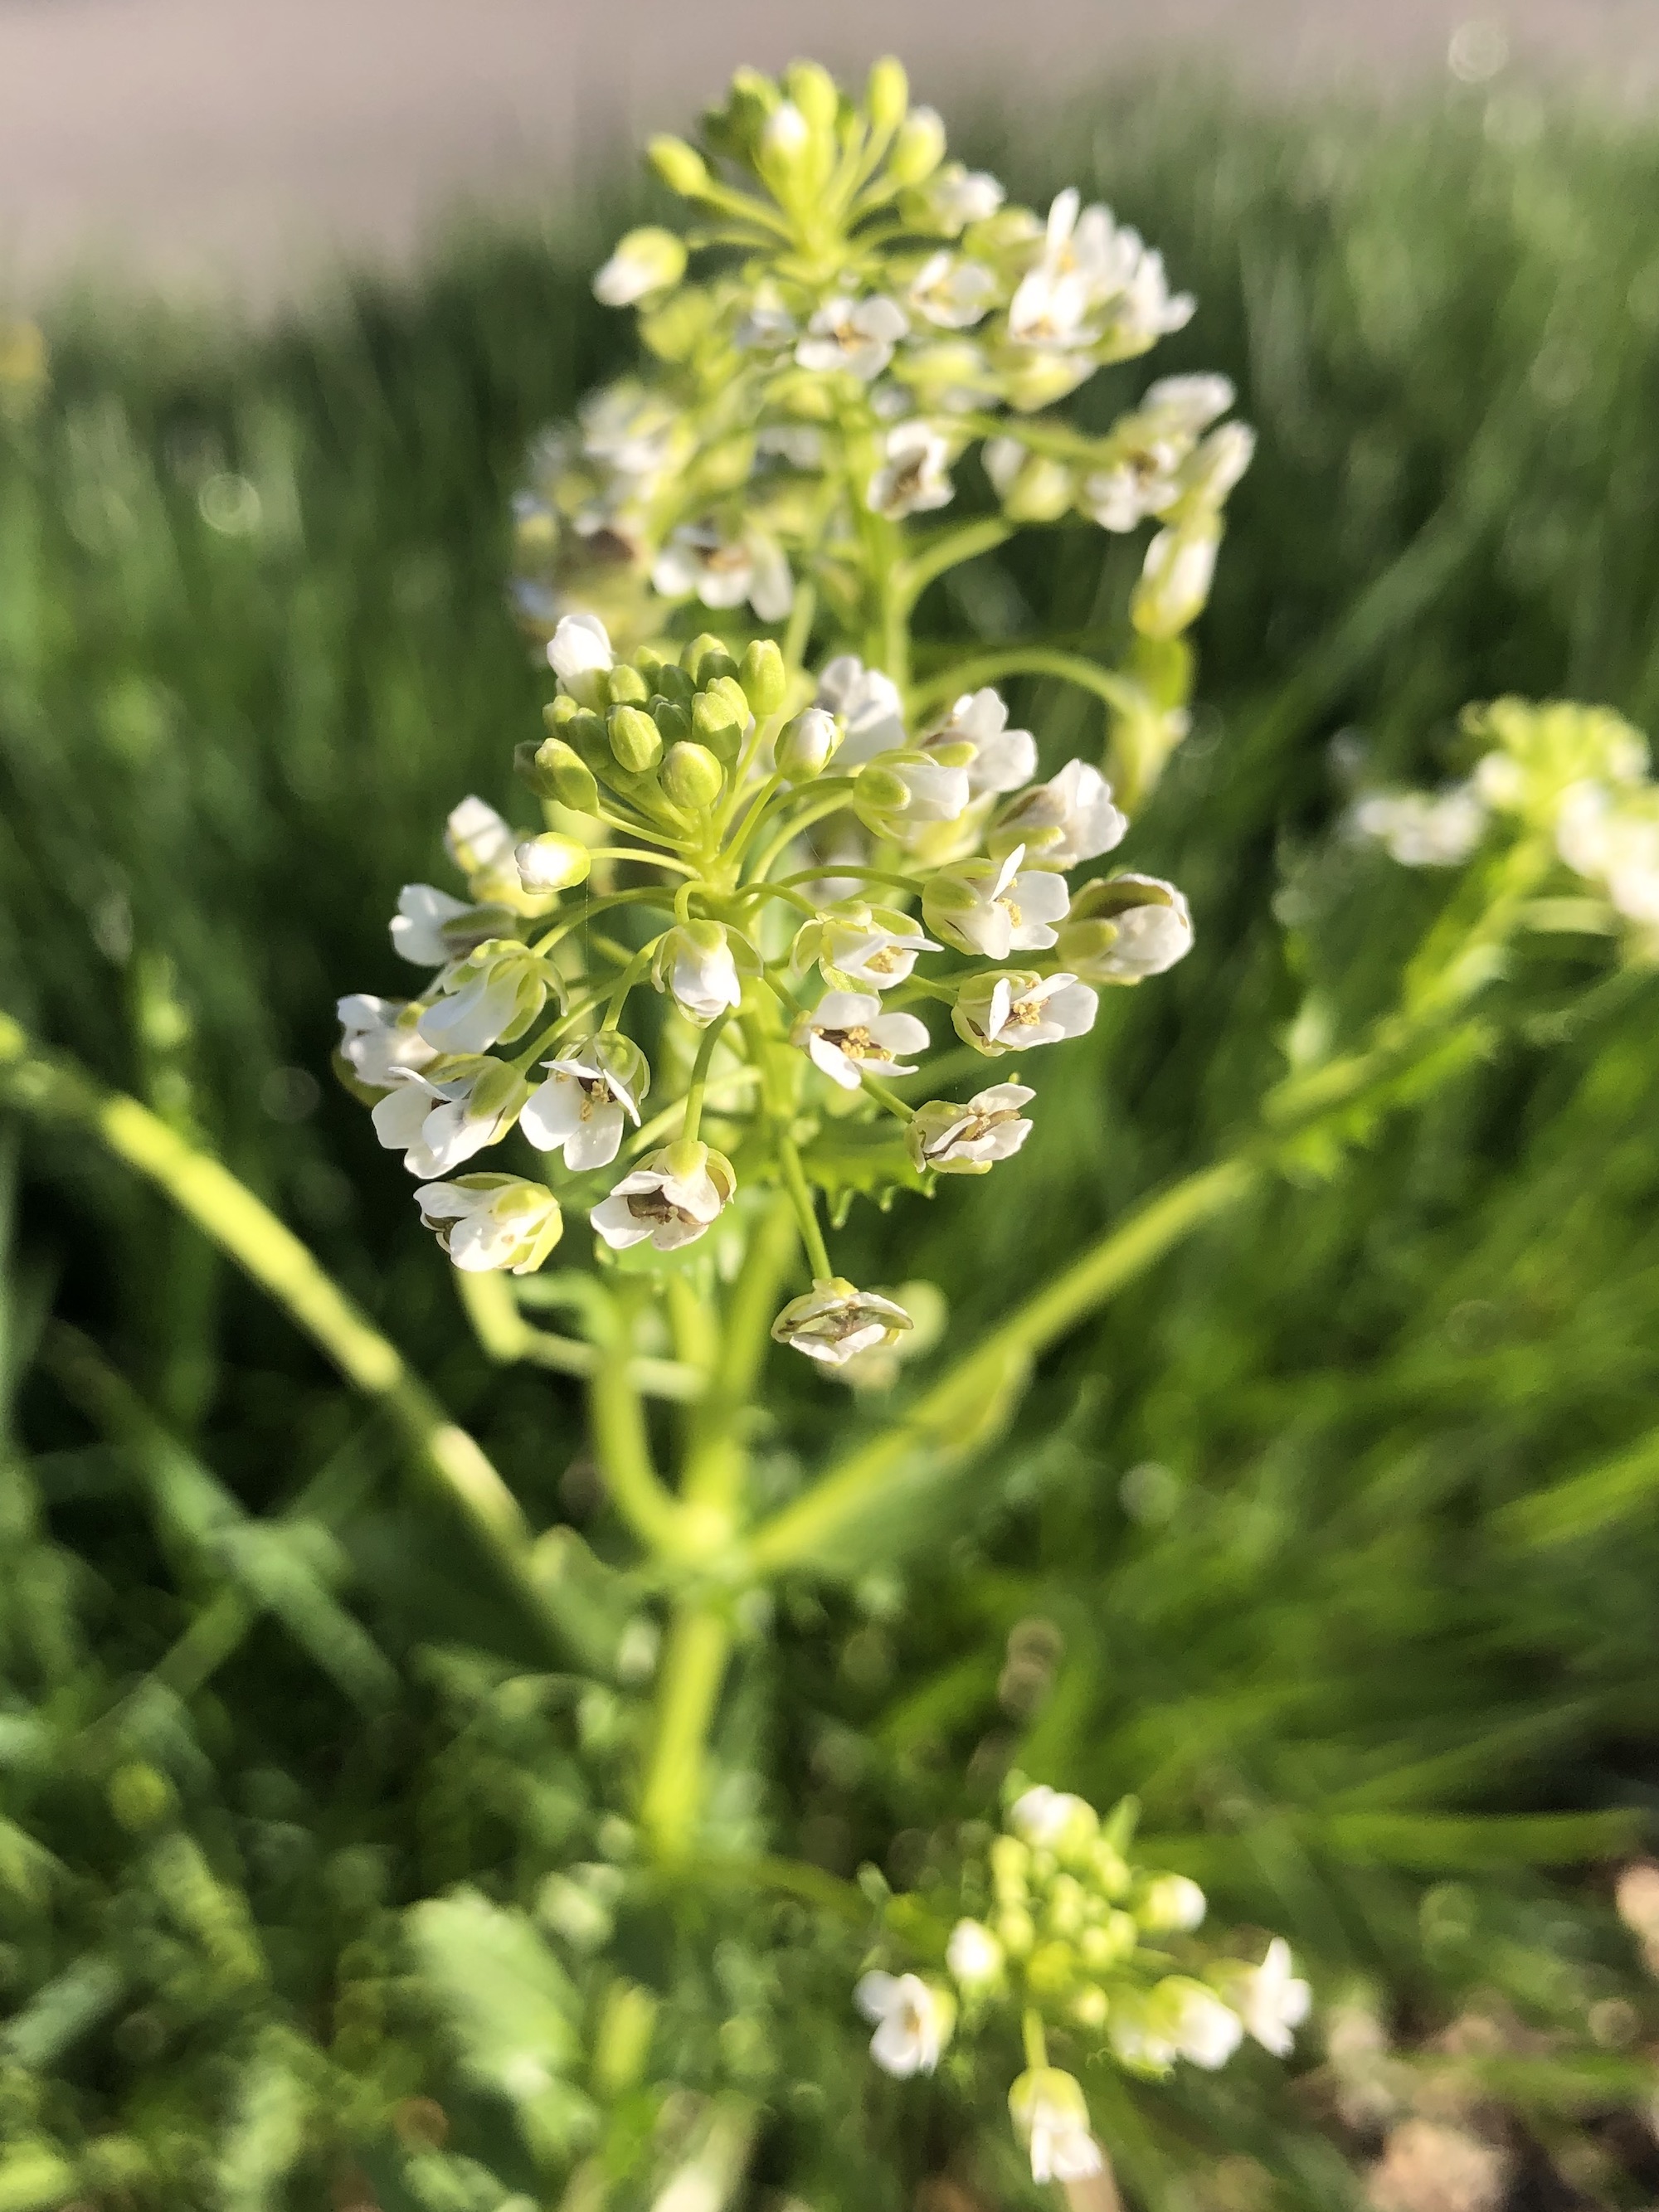 Field Pennycress next to sidewalk on Monroe Street in Madison, Wisconsin on May 8, 2021.